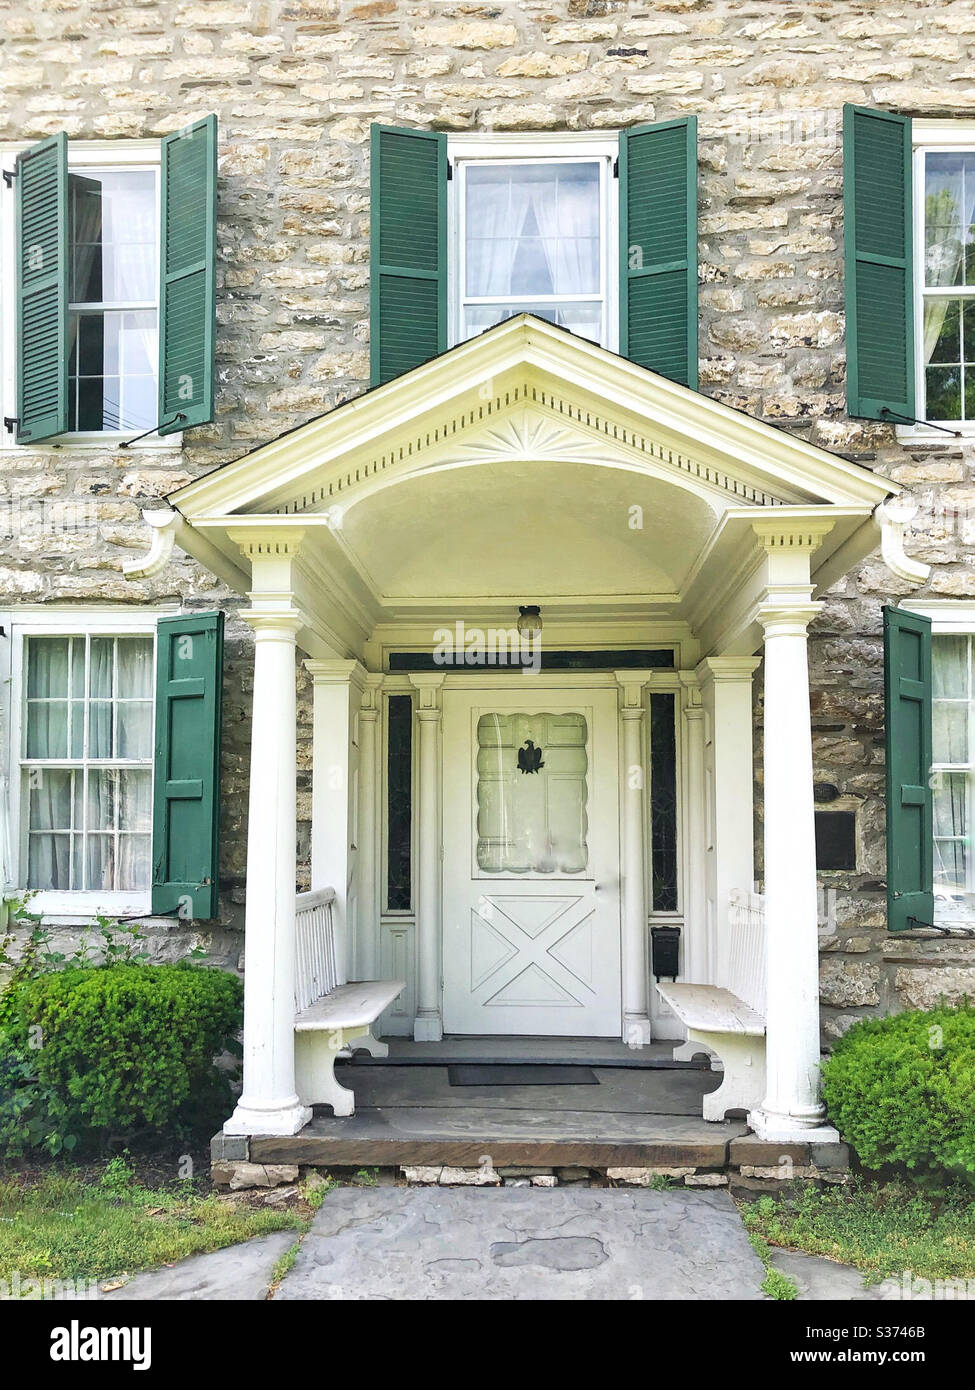 Front door of stone house with green shutters Stock Photo